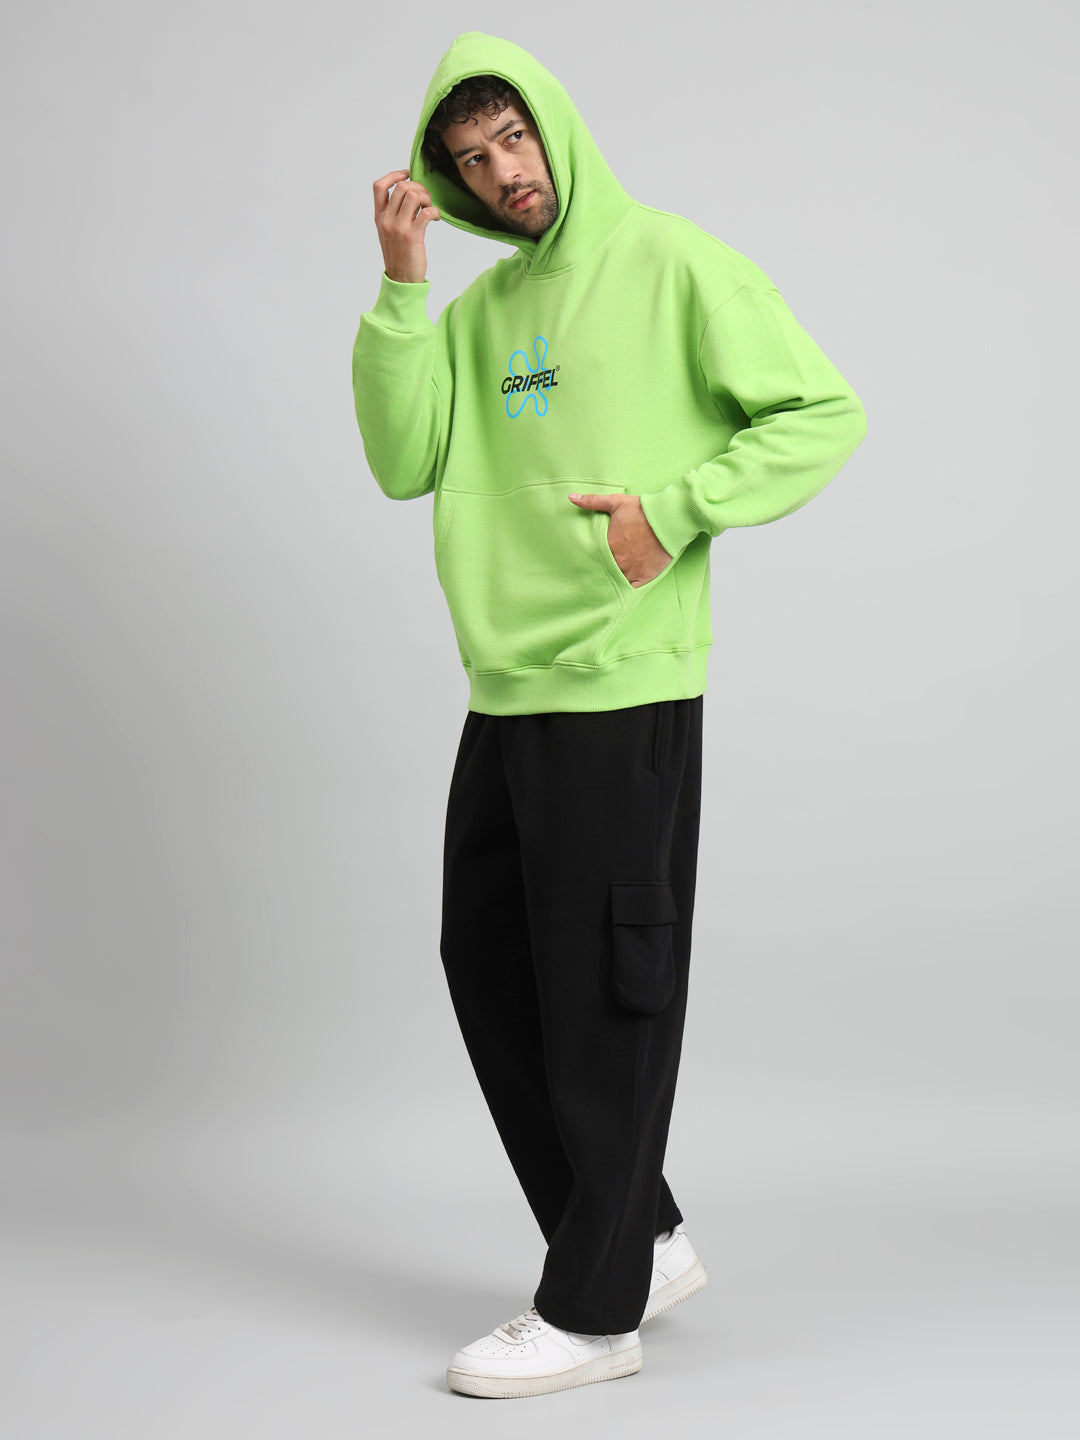 Griffel Men Oversized Fit No One Saves You Parrot 100% Cotton Fleece Hoodie and trackpant - griffel